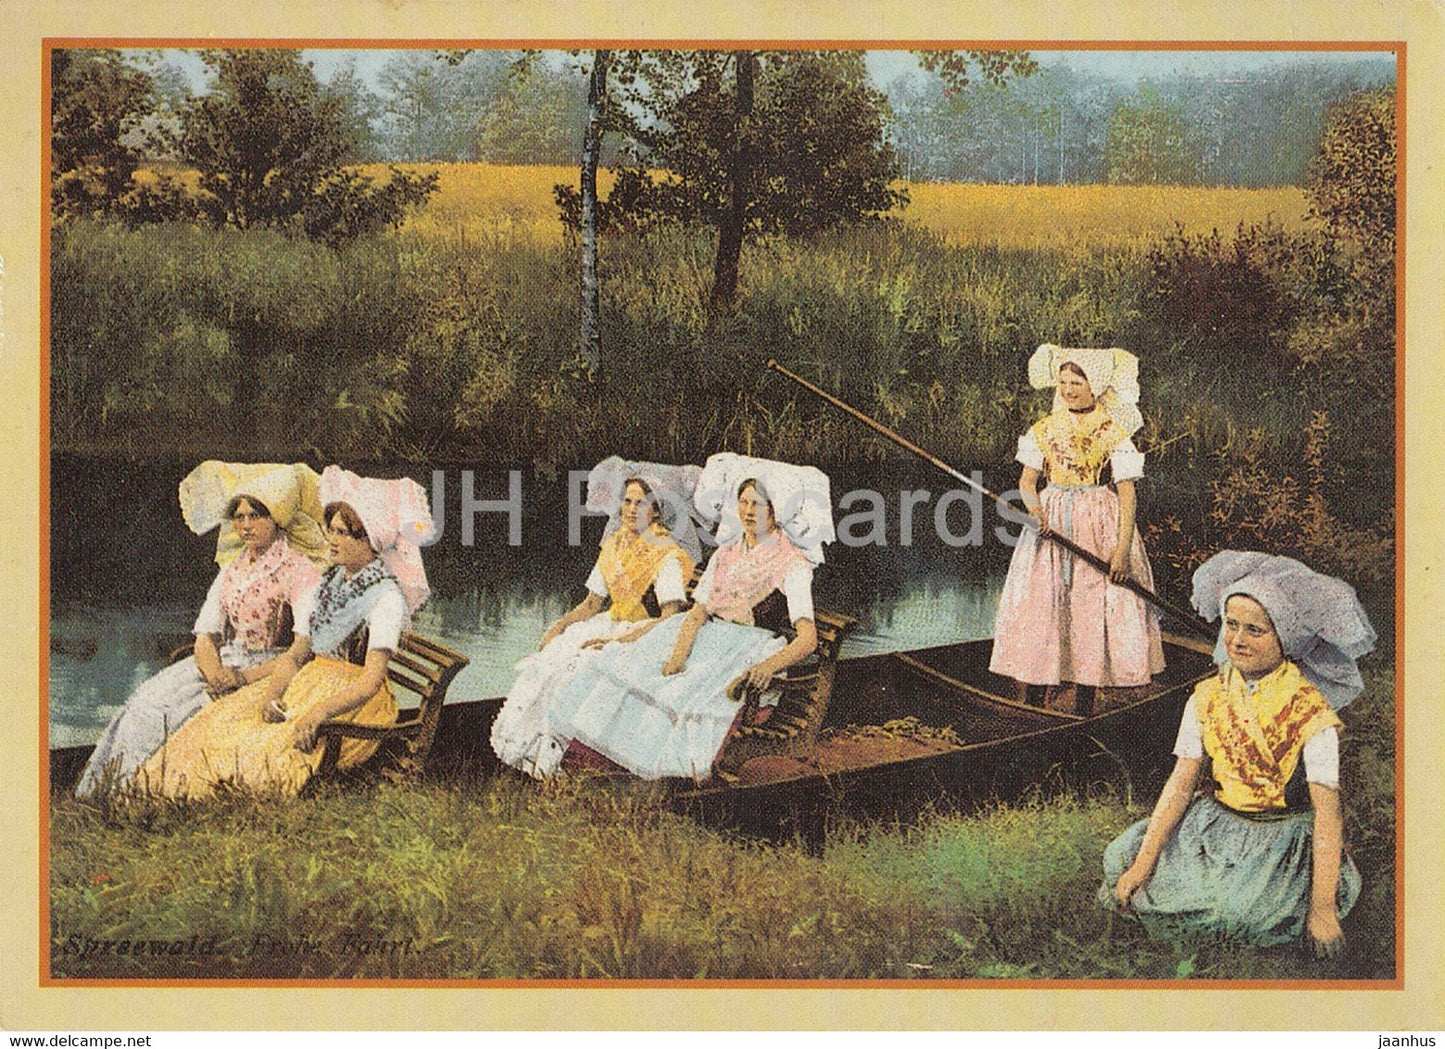 Old postcard REPRODUCTION - Women in boat - folk costumes - 1994 - Germany - used - JH Postcards